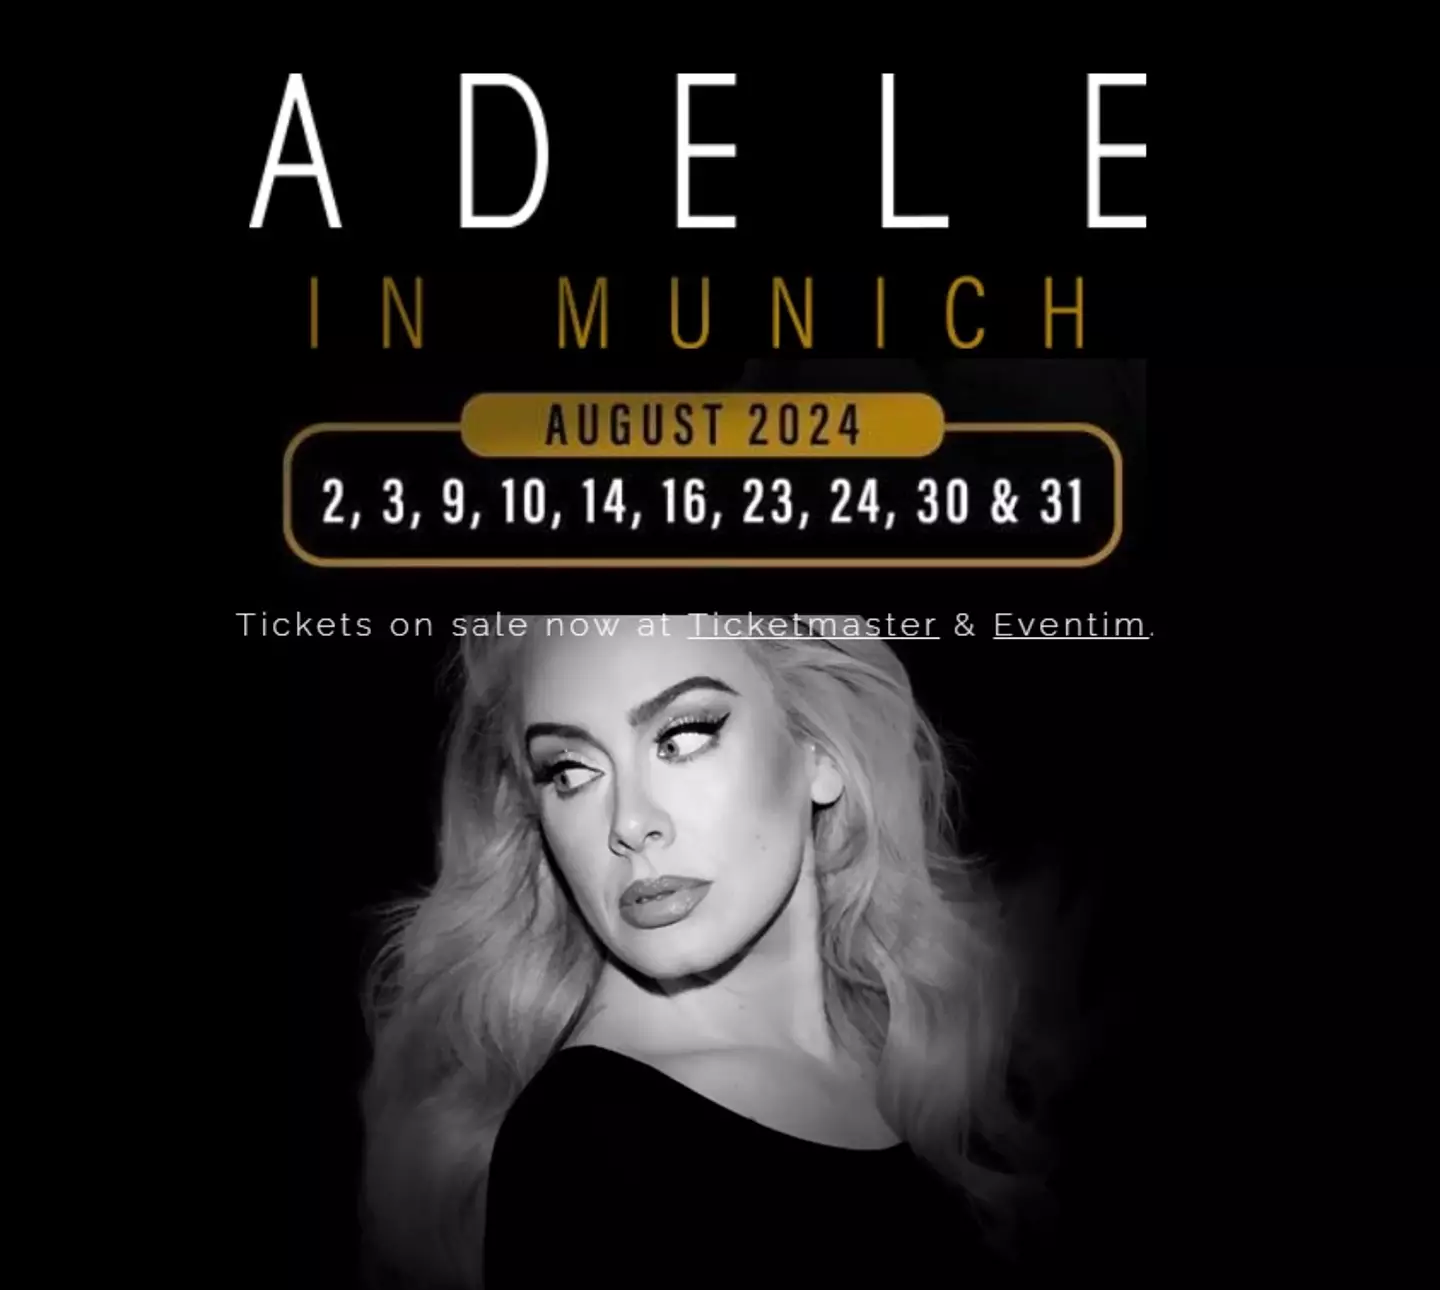 Adele will be playing her first mainland European shows for eight years, are you excited?